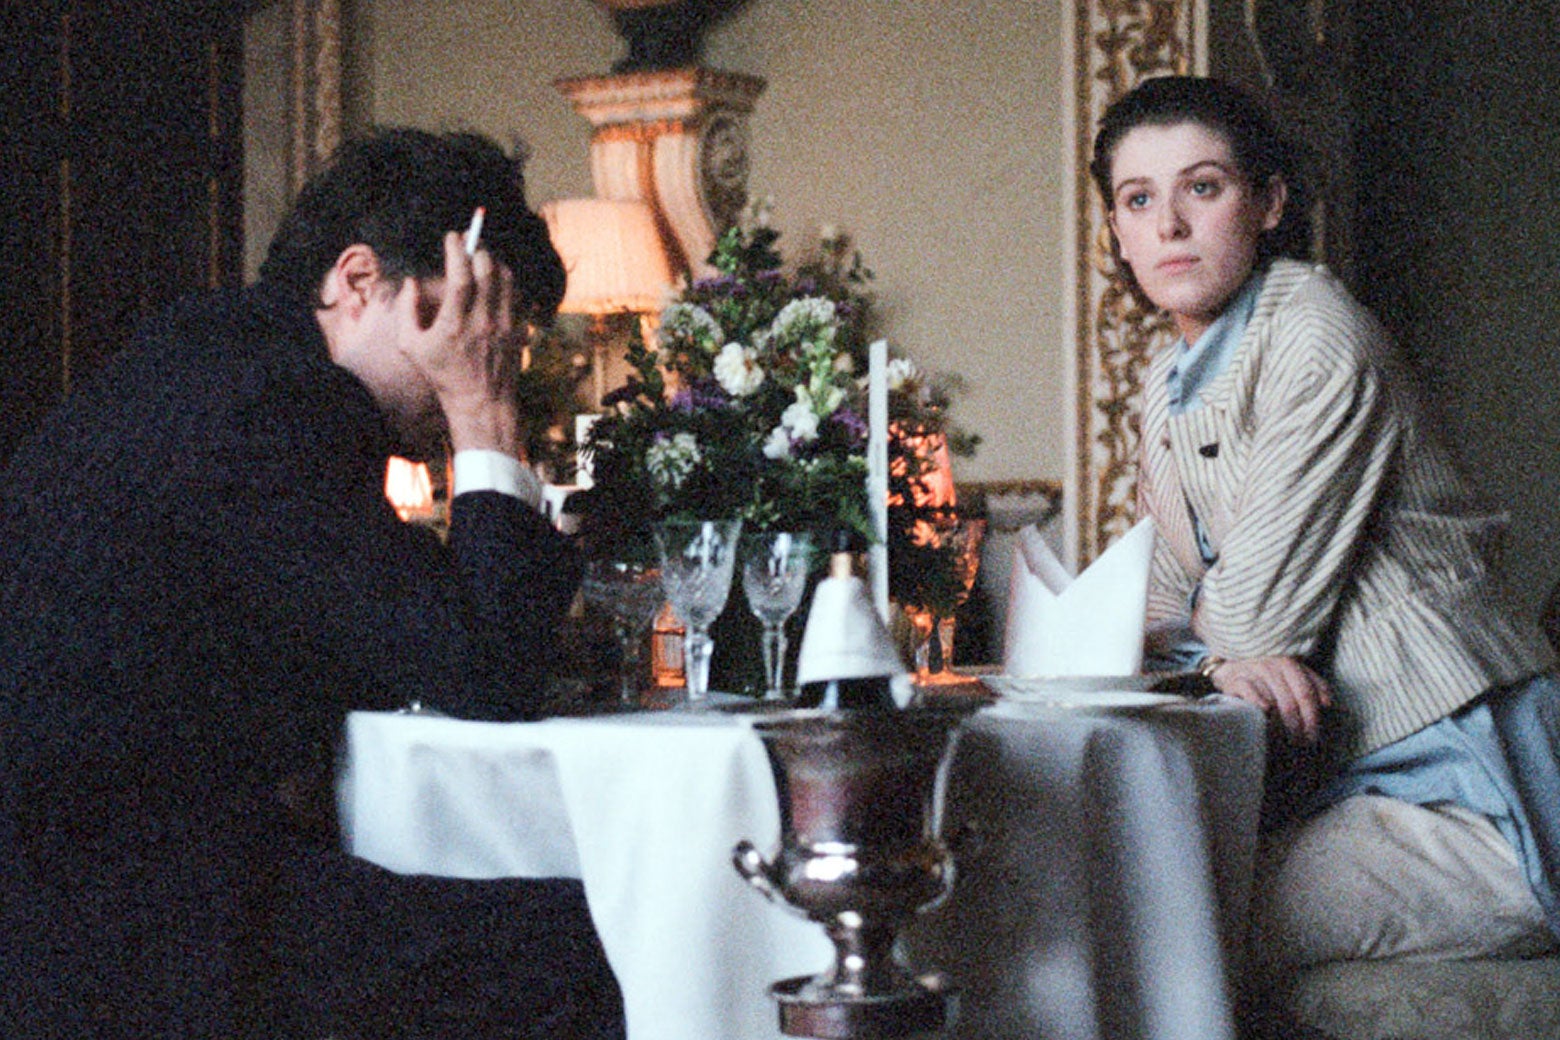 Tom Burke and Honor Swinton-Byrne dine at a fancy establishment in The Souvenir.